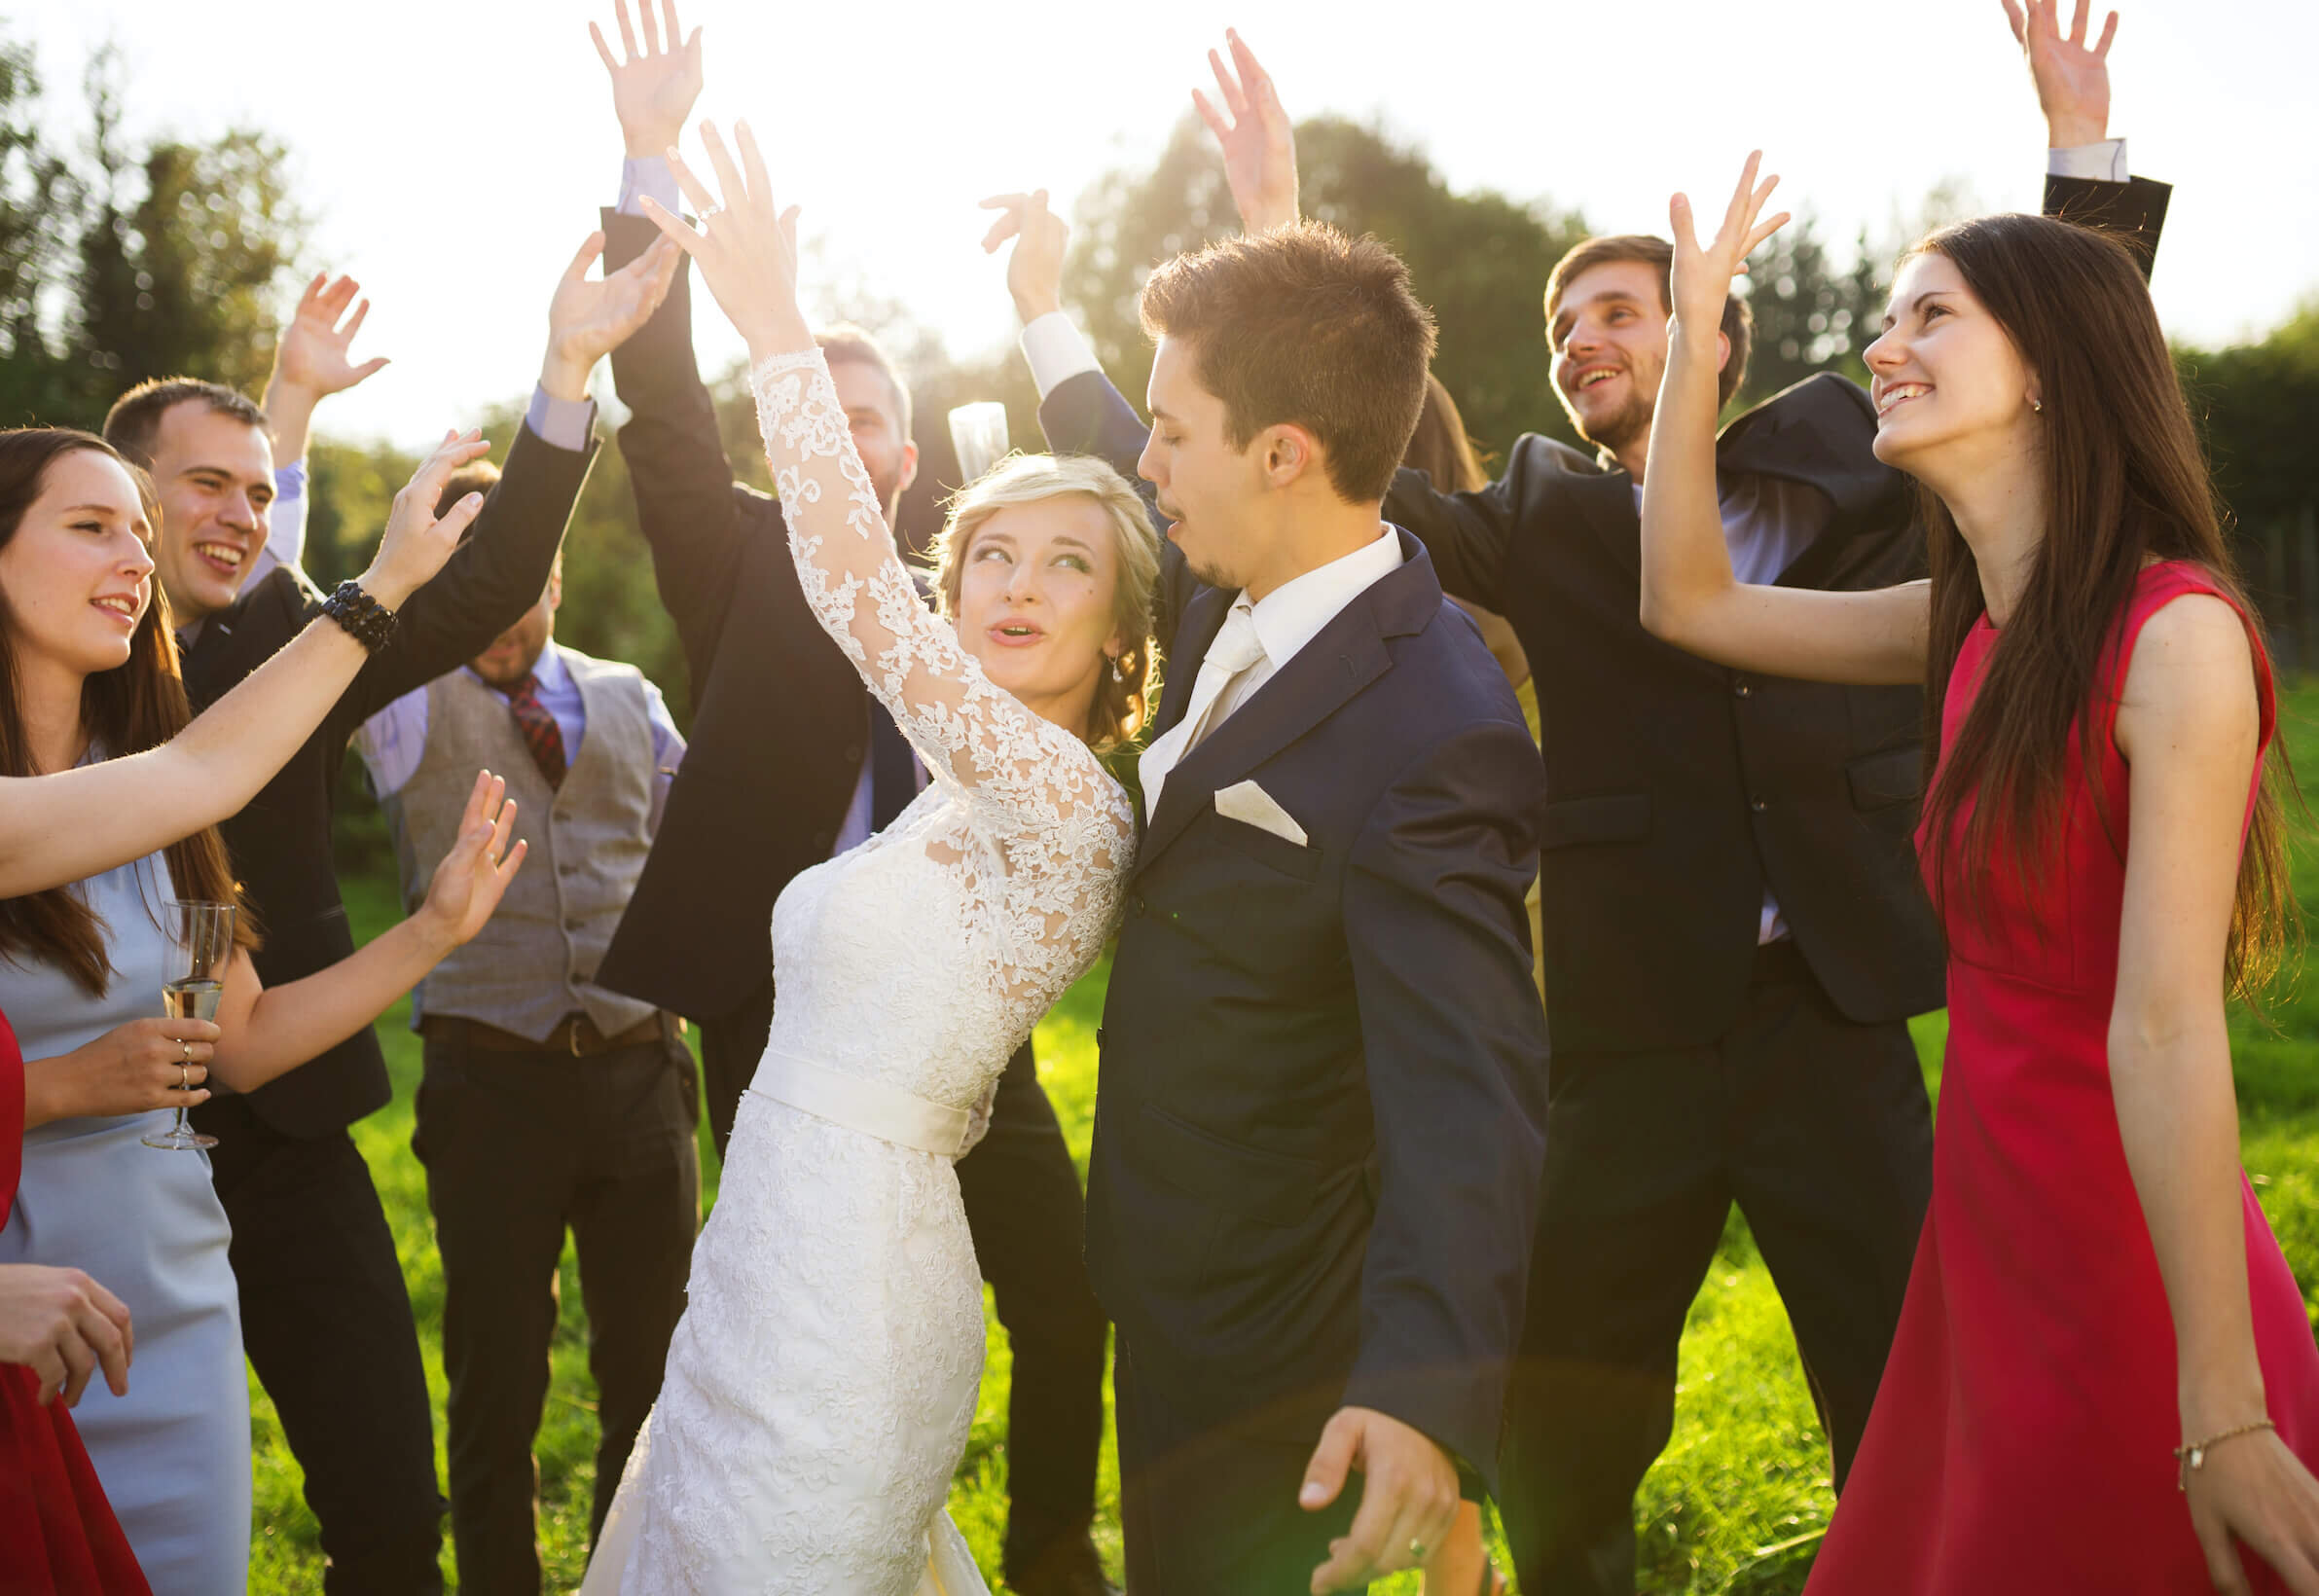 100 Instrumental Wedding Songs for the Walk Down the Aisle - Bride